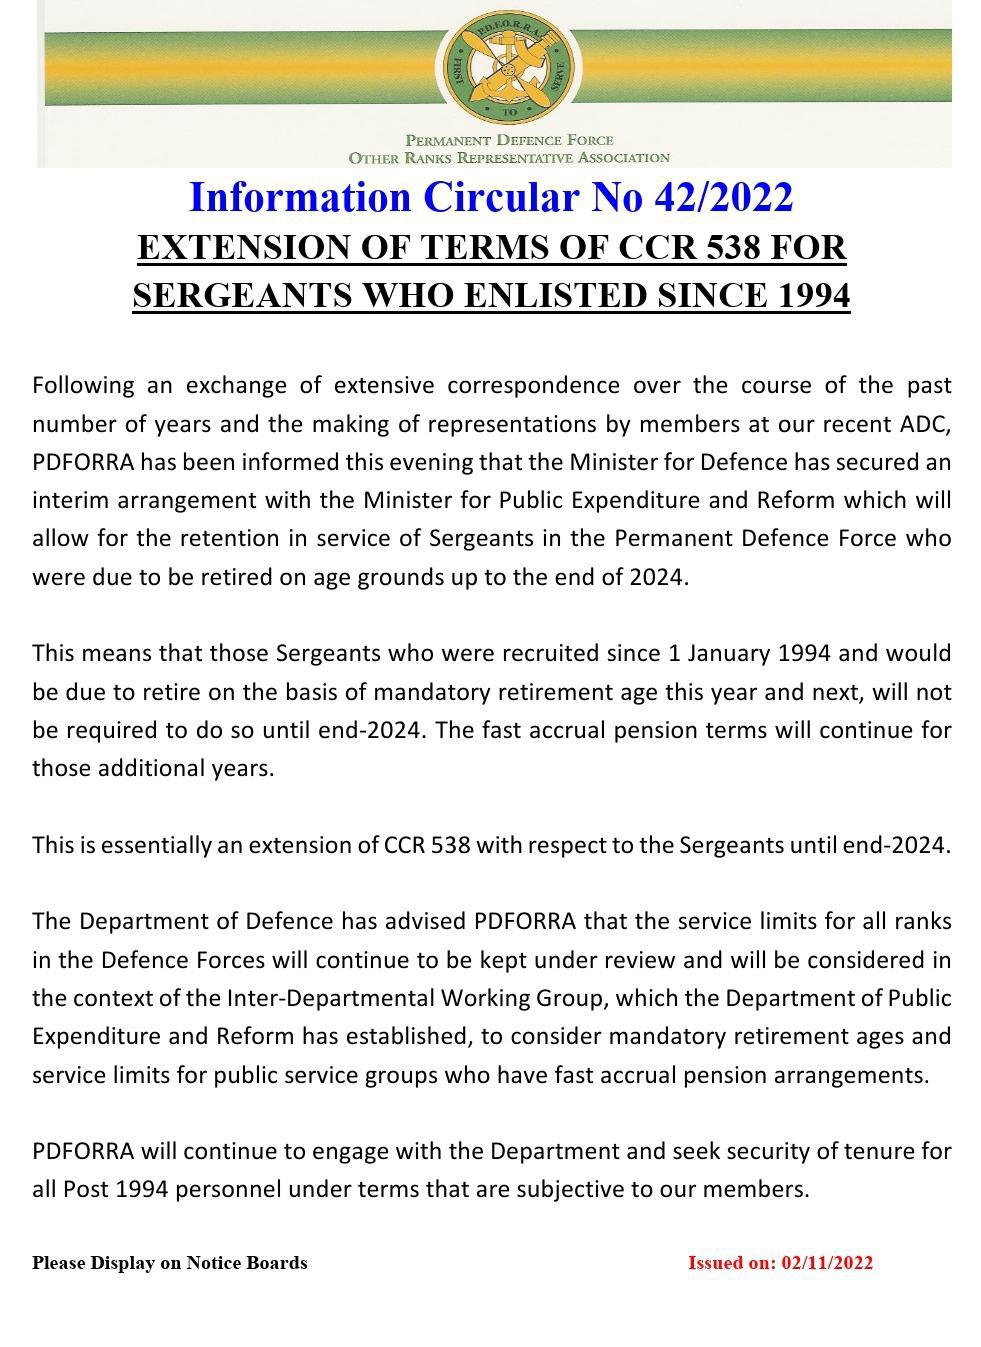 Information Circular No 42 of 22 - Extension of Terms of CCR538 for Sgt's who Enlisted since 1994